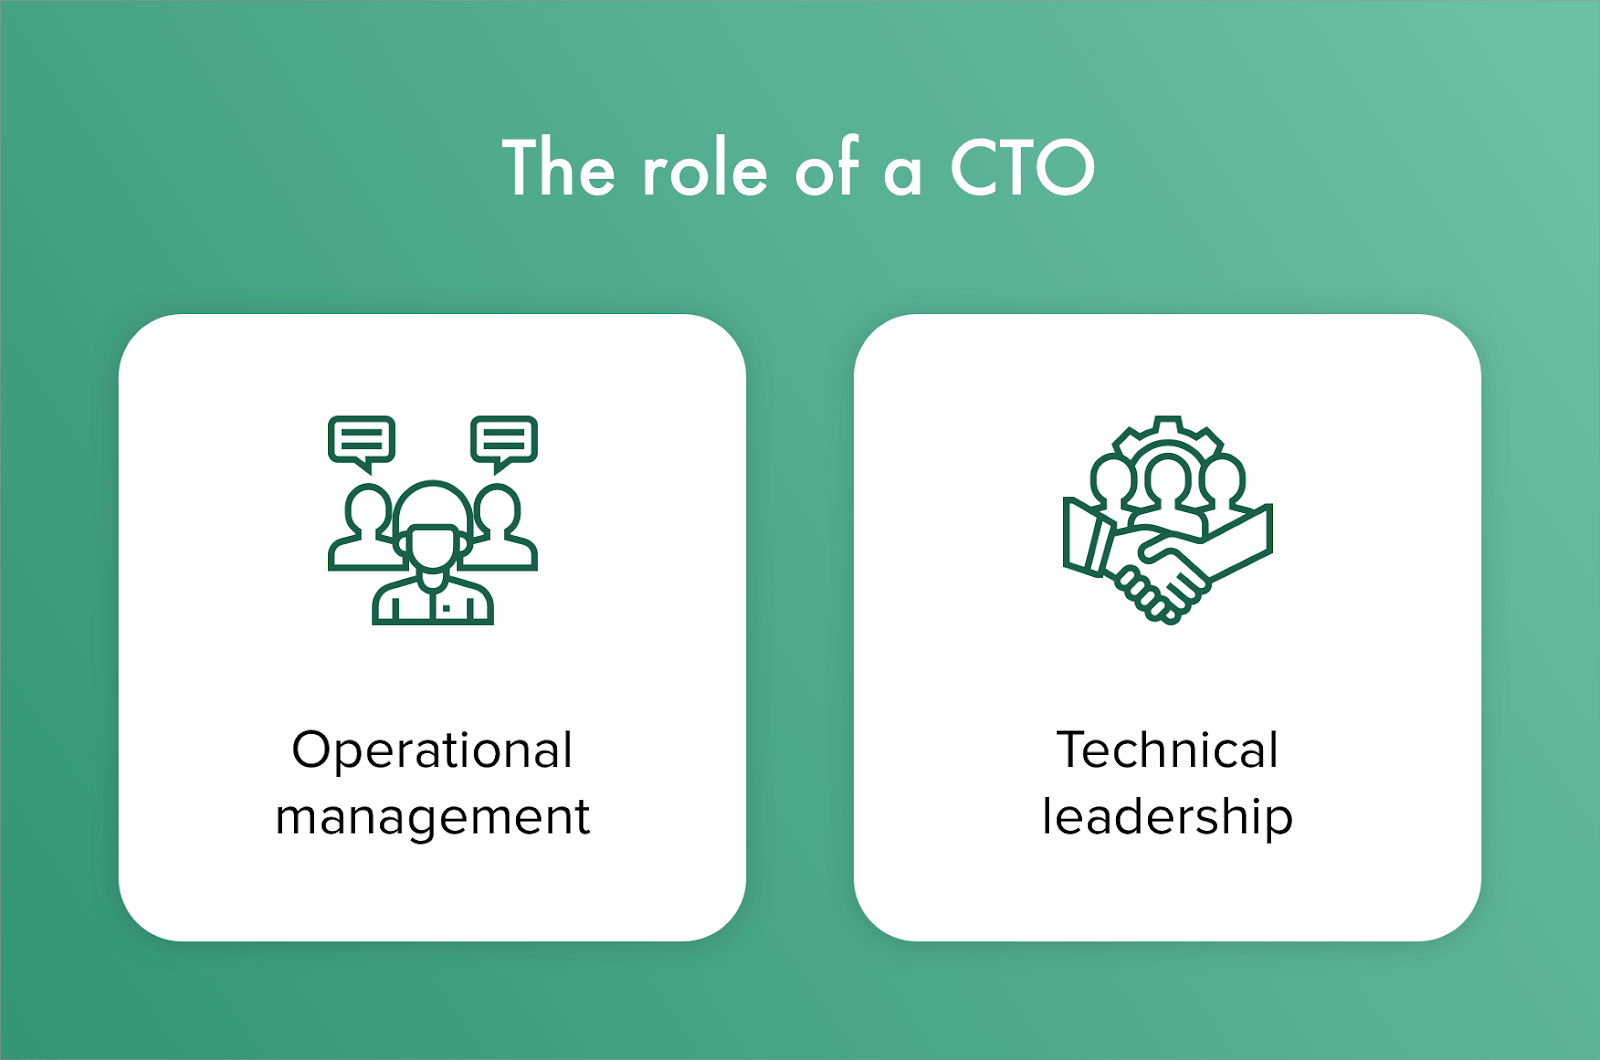 What kind of CTO are you looking for? The role of a CTO